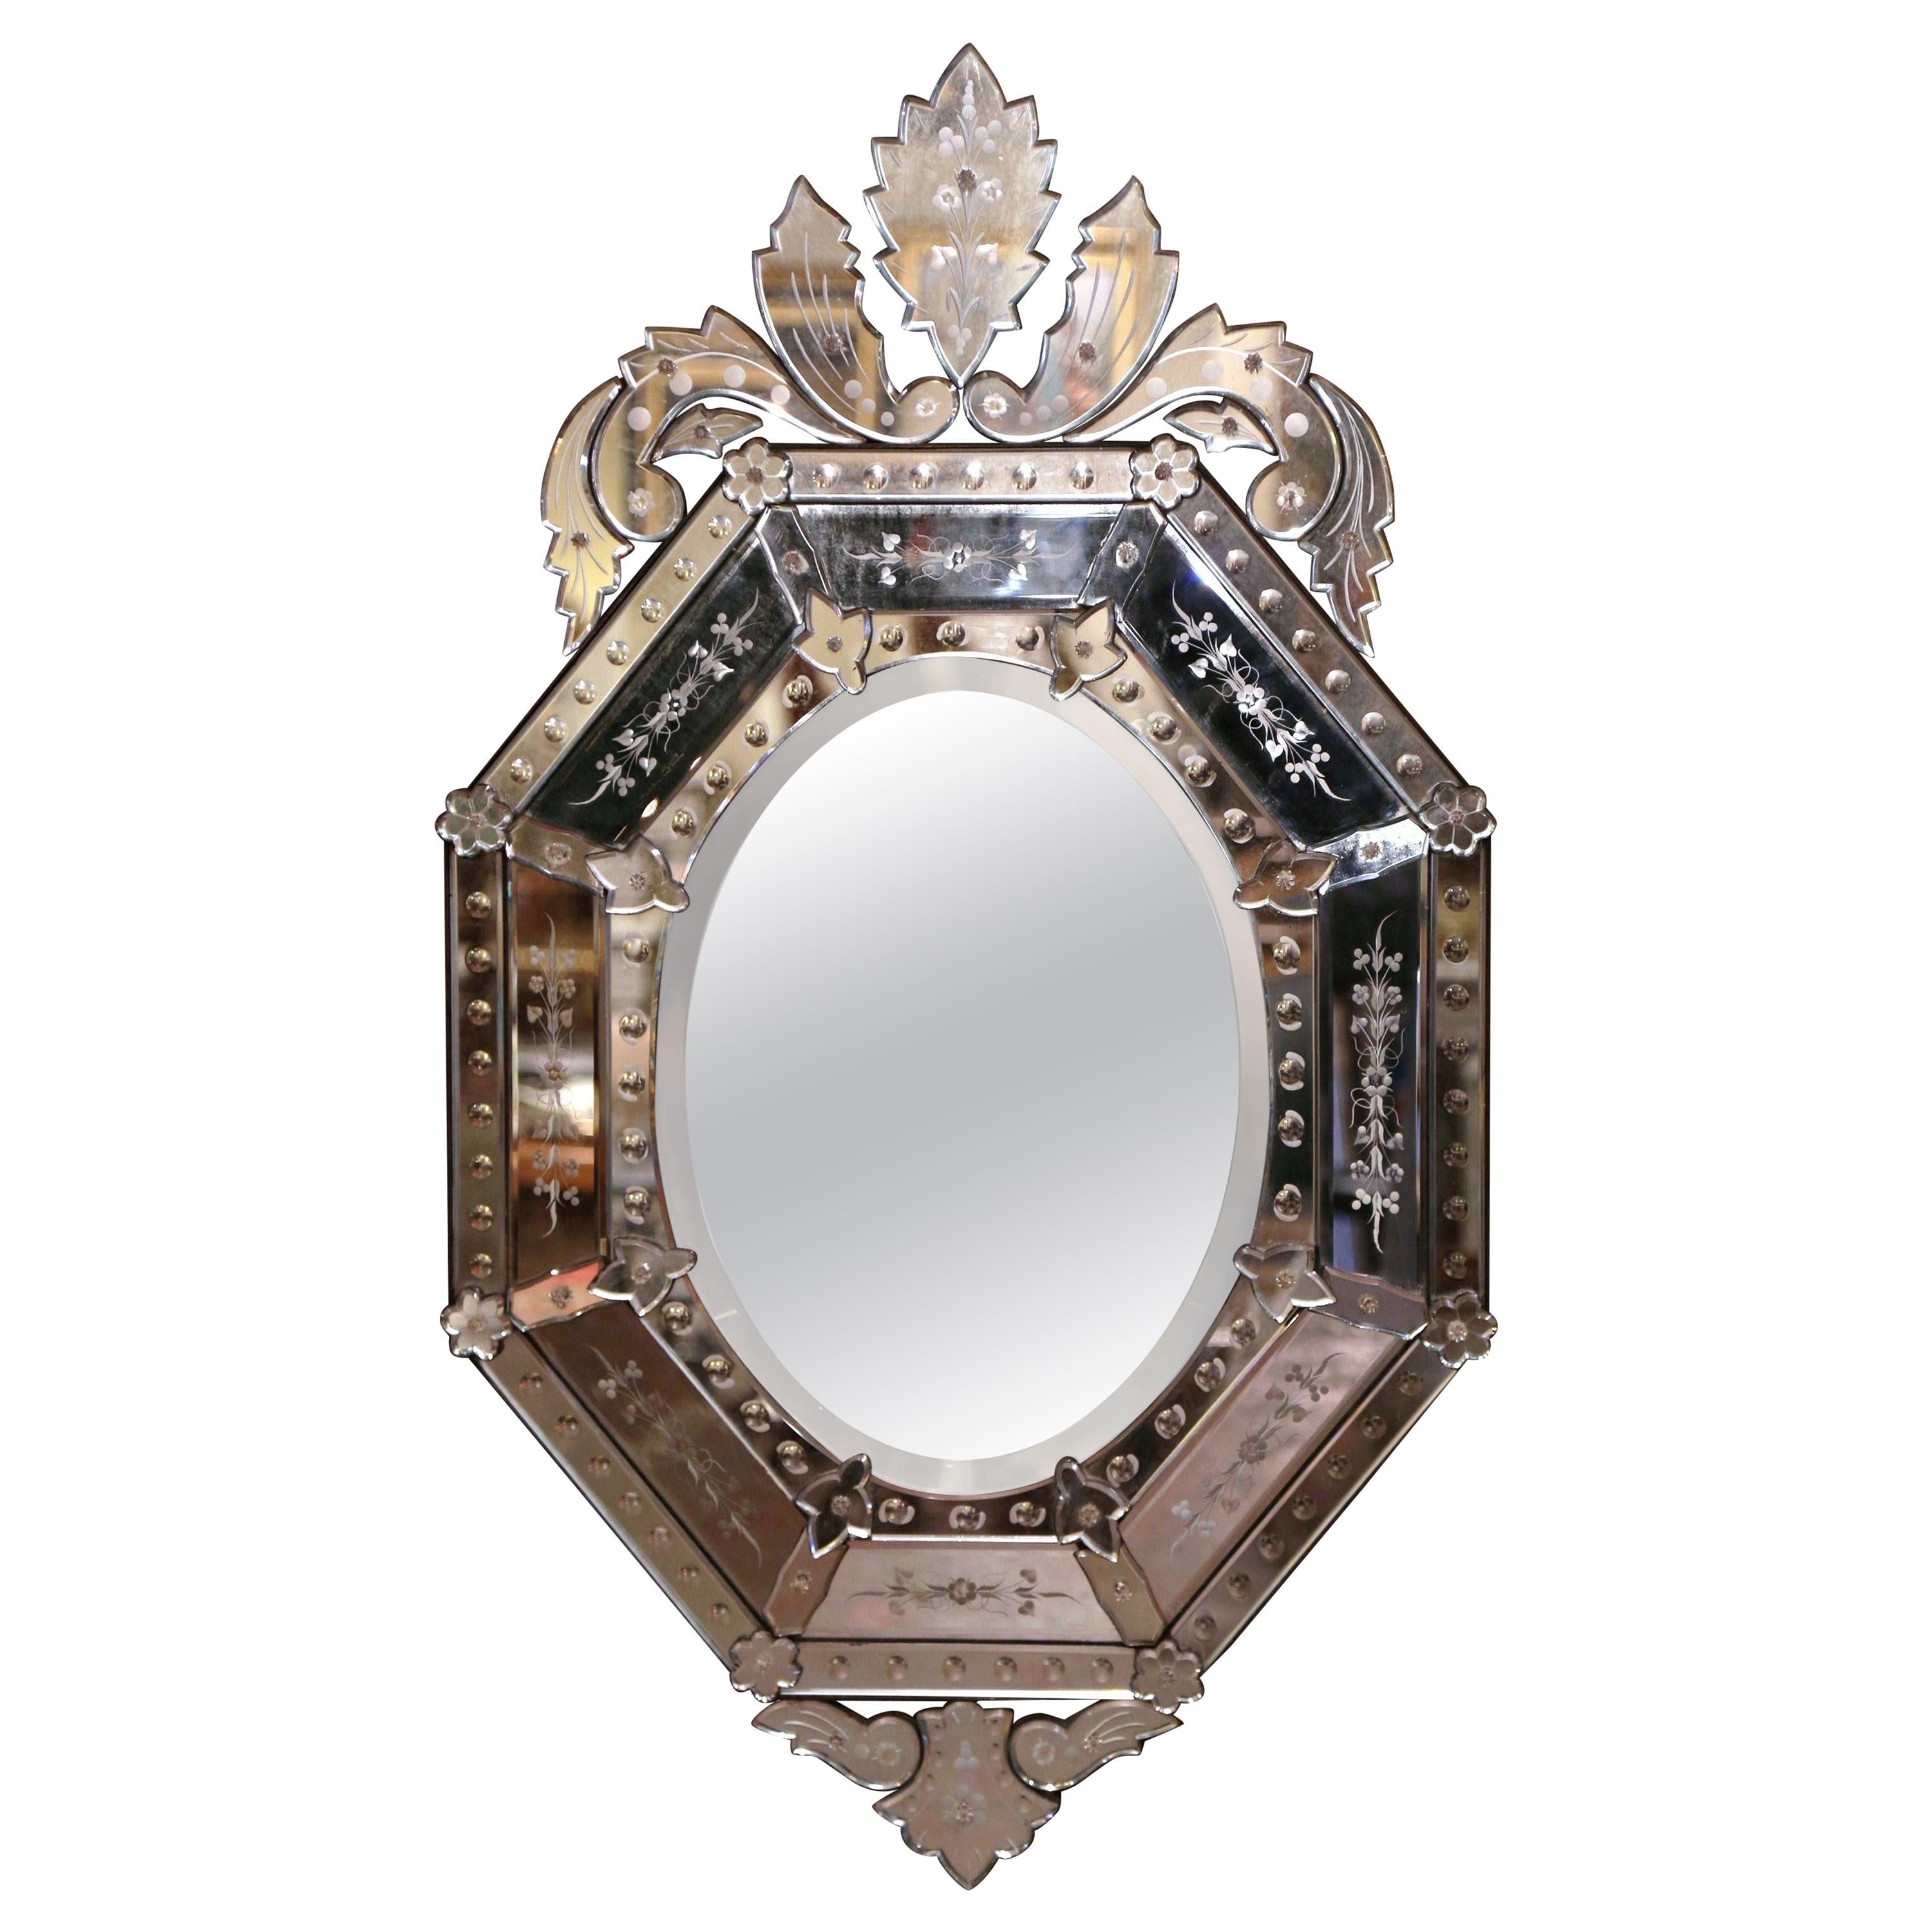 Early 20th Century Italian Venetian Octagonal Mirror with Painted Floral Etching